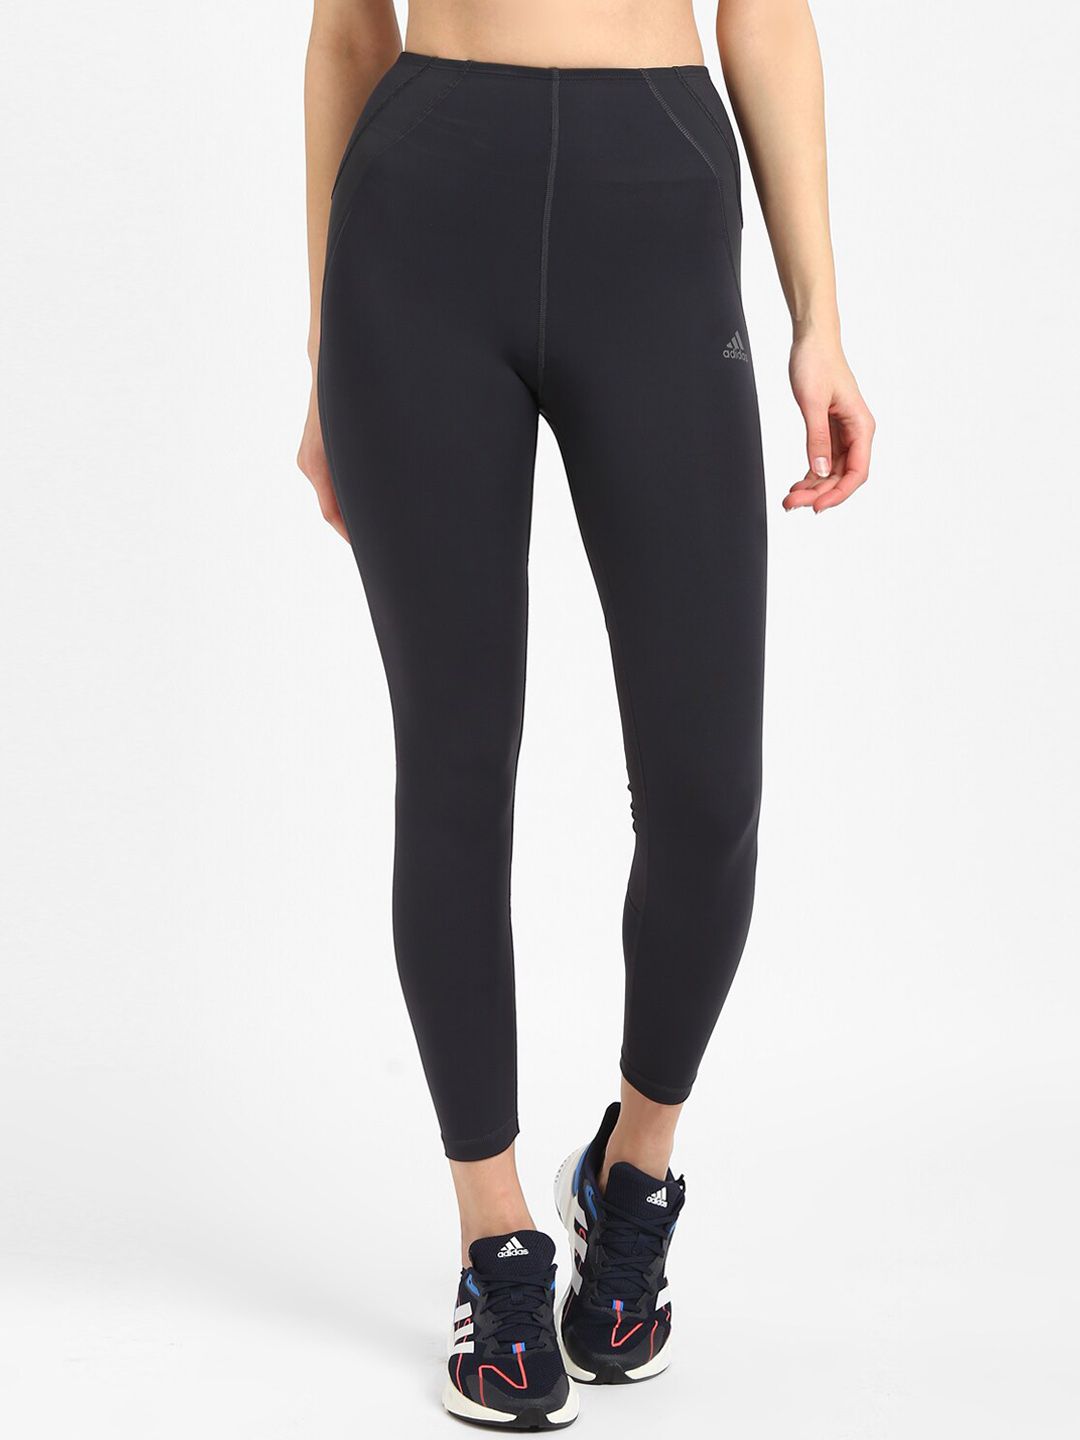 ADIDAS Women Grey Solid Training Or Gym Sports Tights Price in India